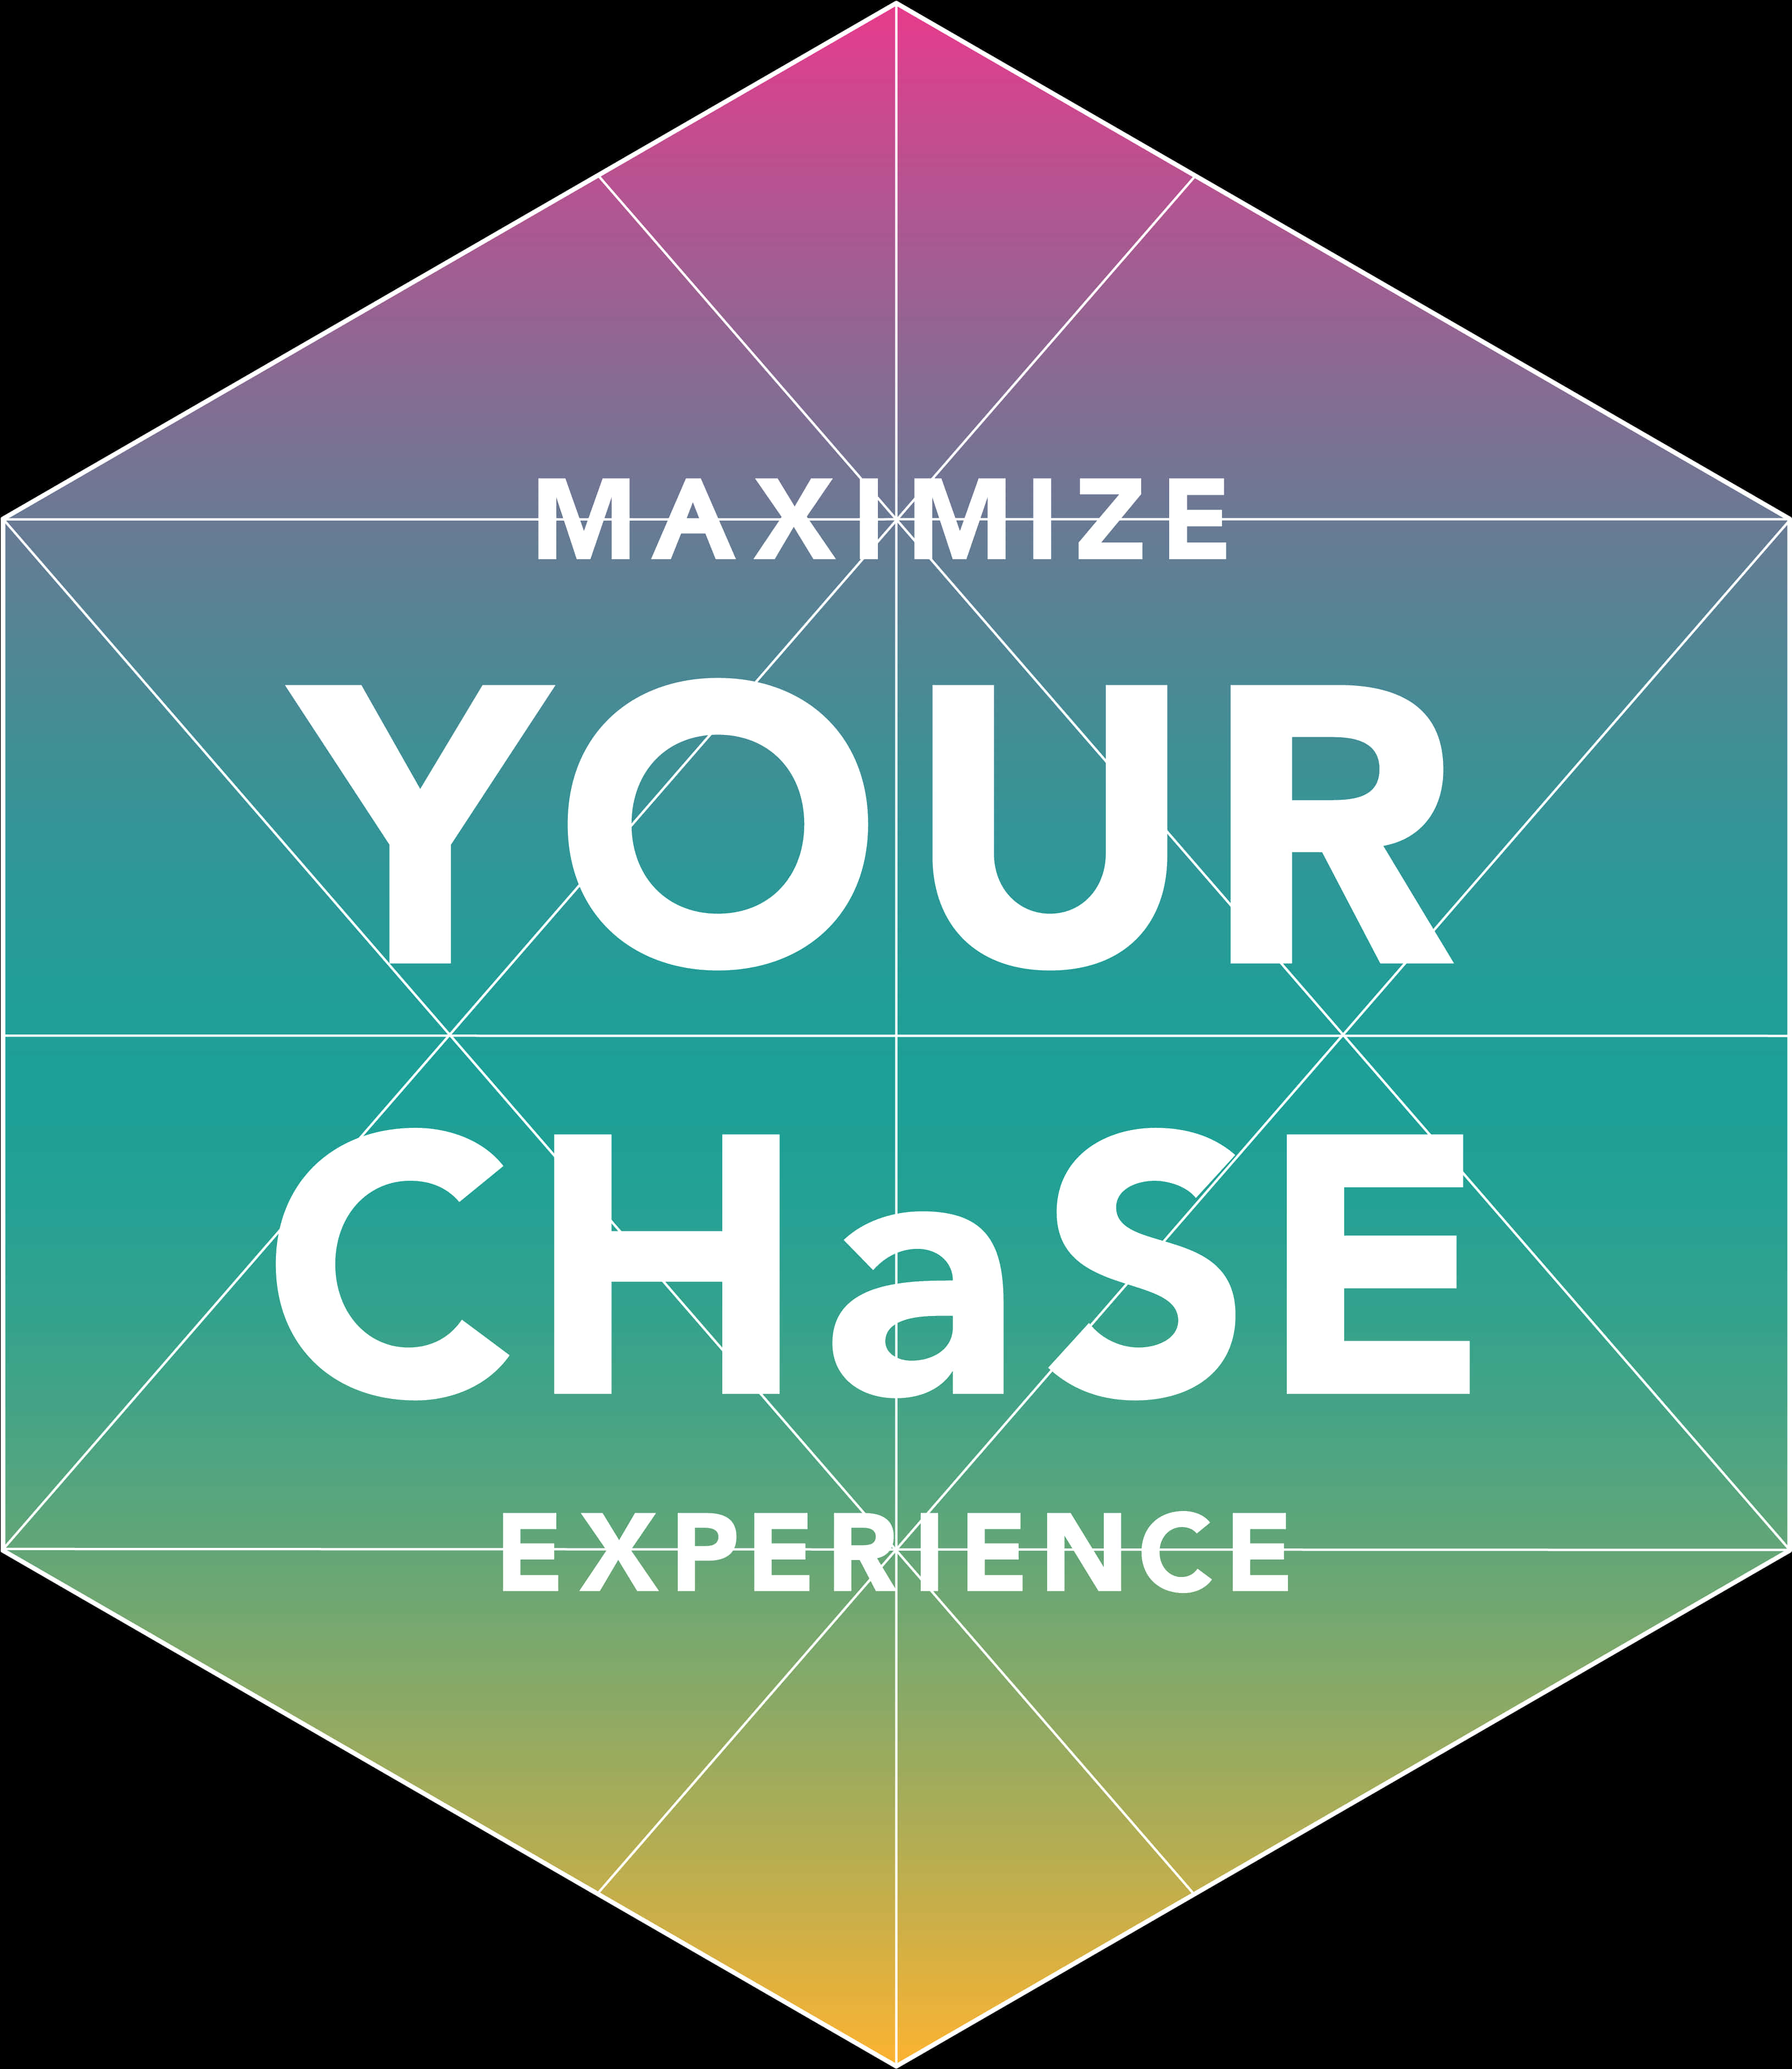 Maximize Your Chase Experience Graphic PNG image